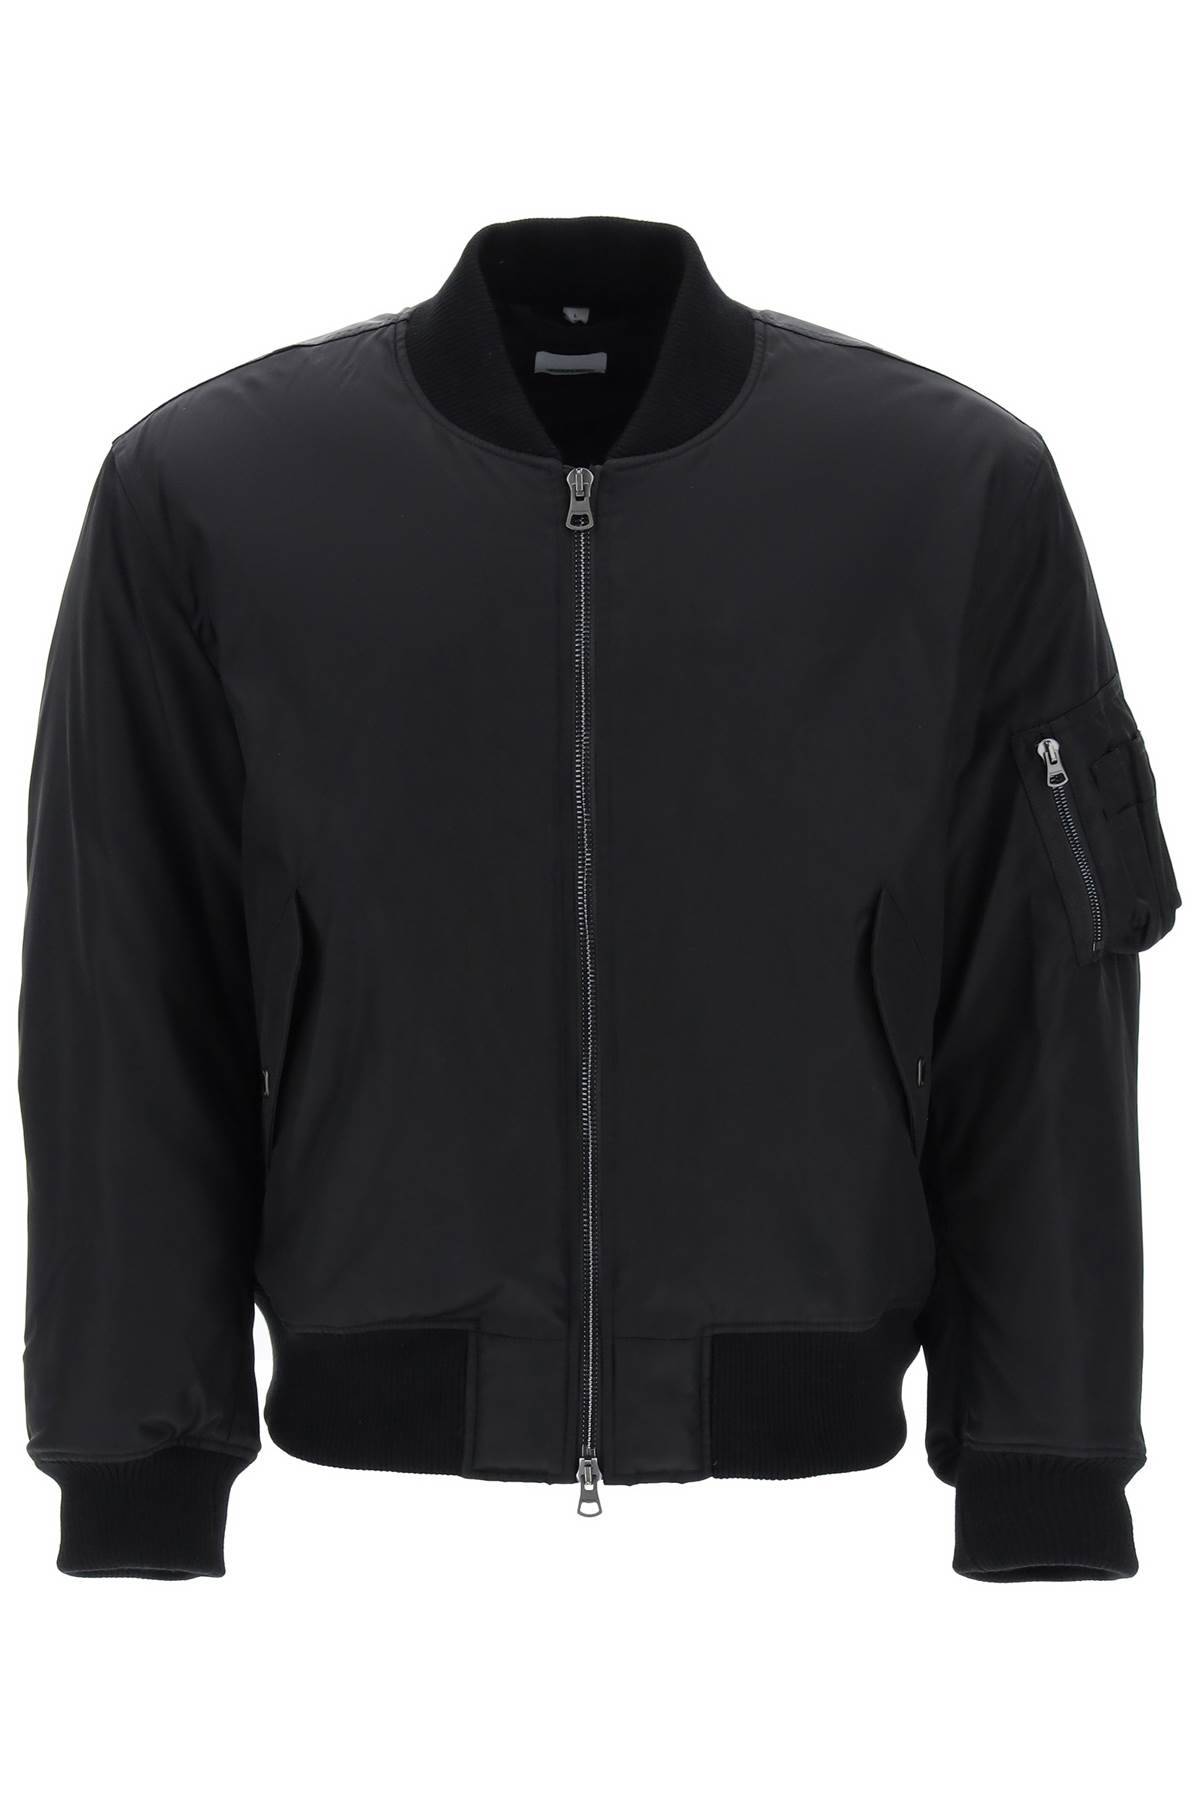 Burberry BURBERRY 'graves' padded bomber jacket with back emblem embroidery